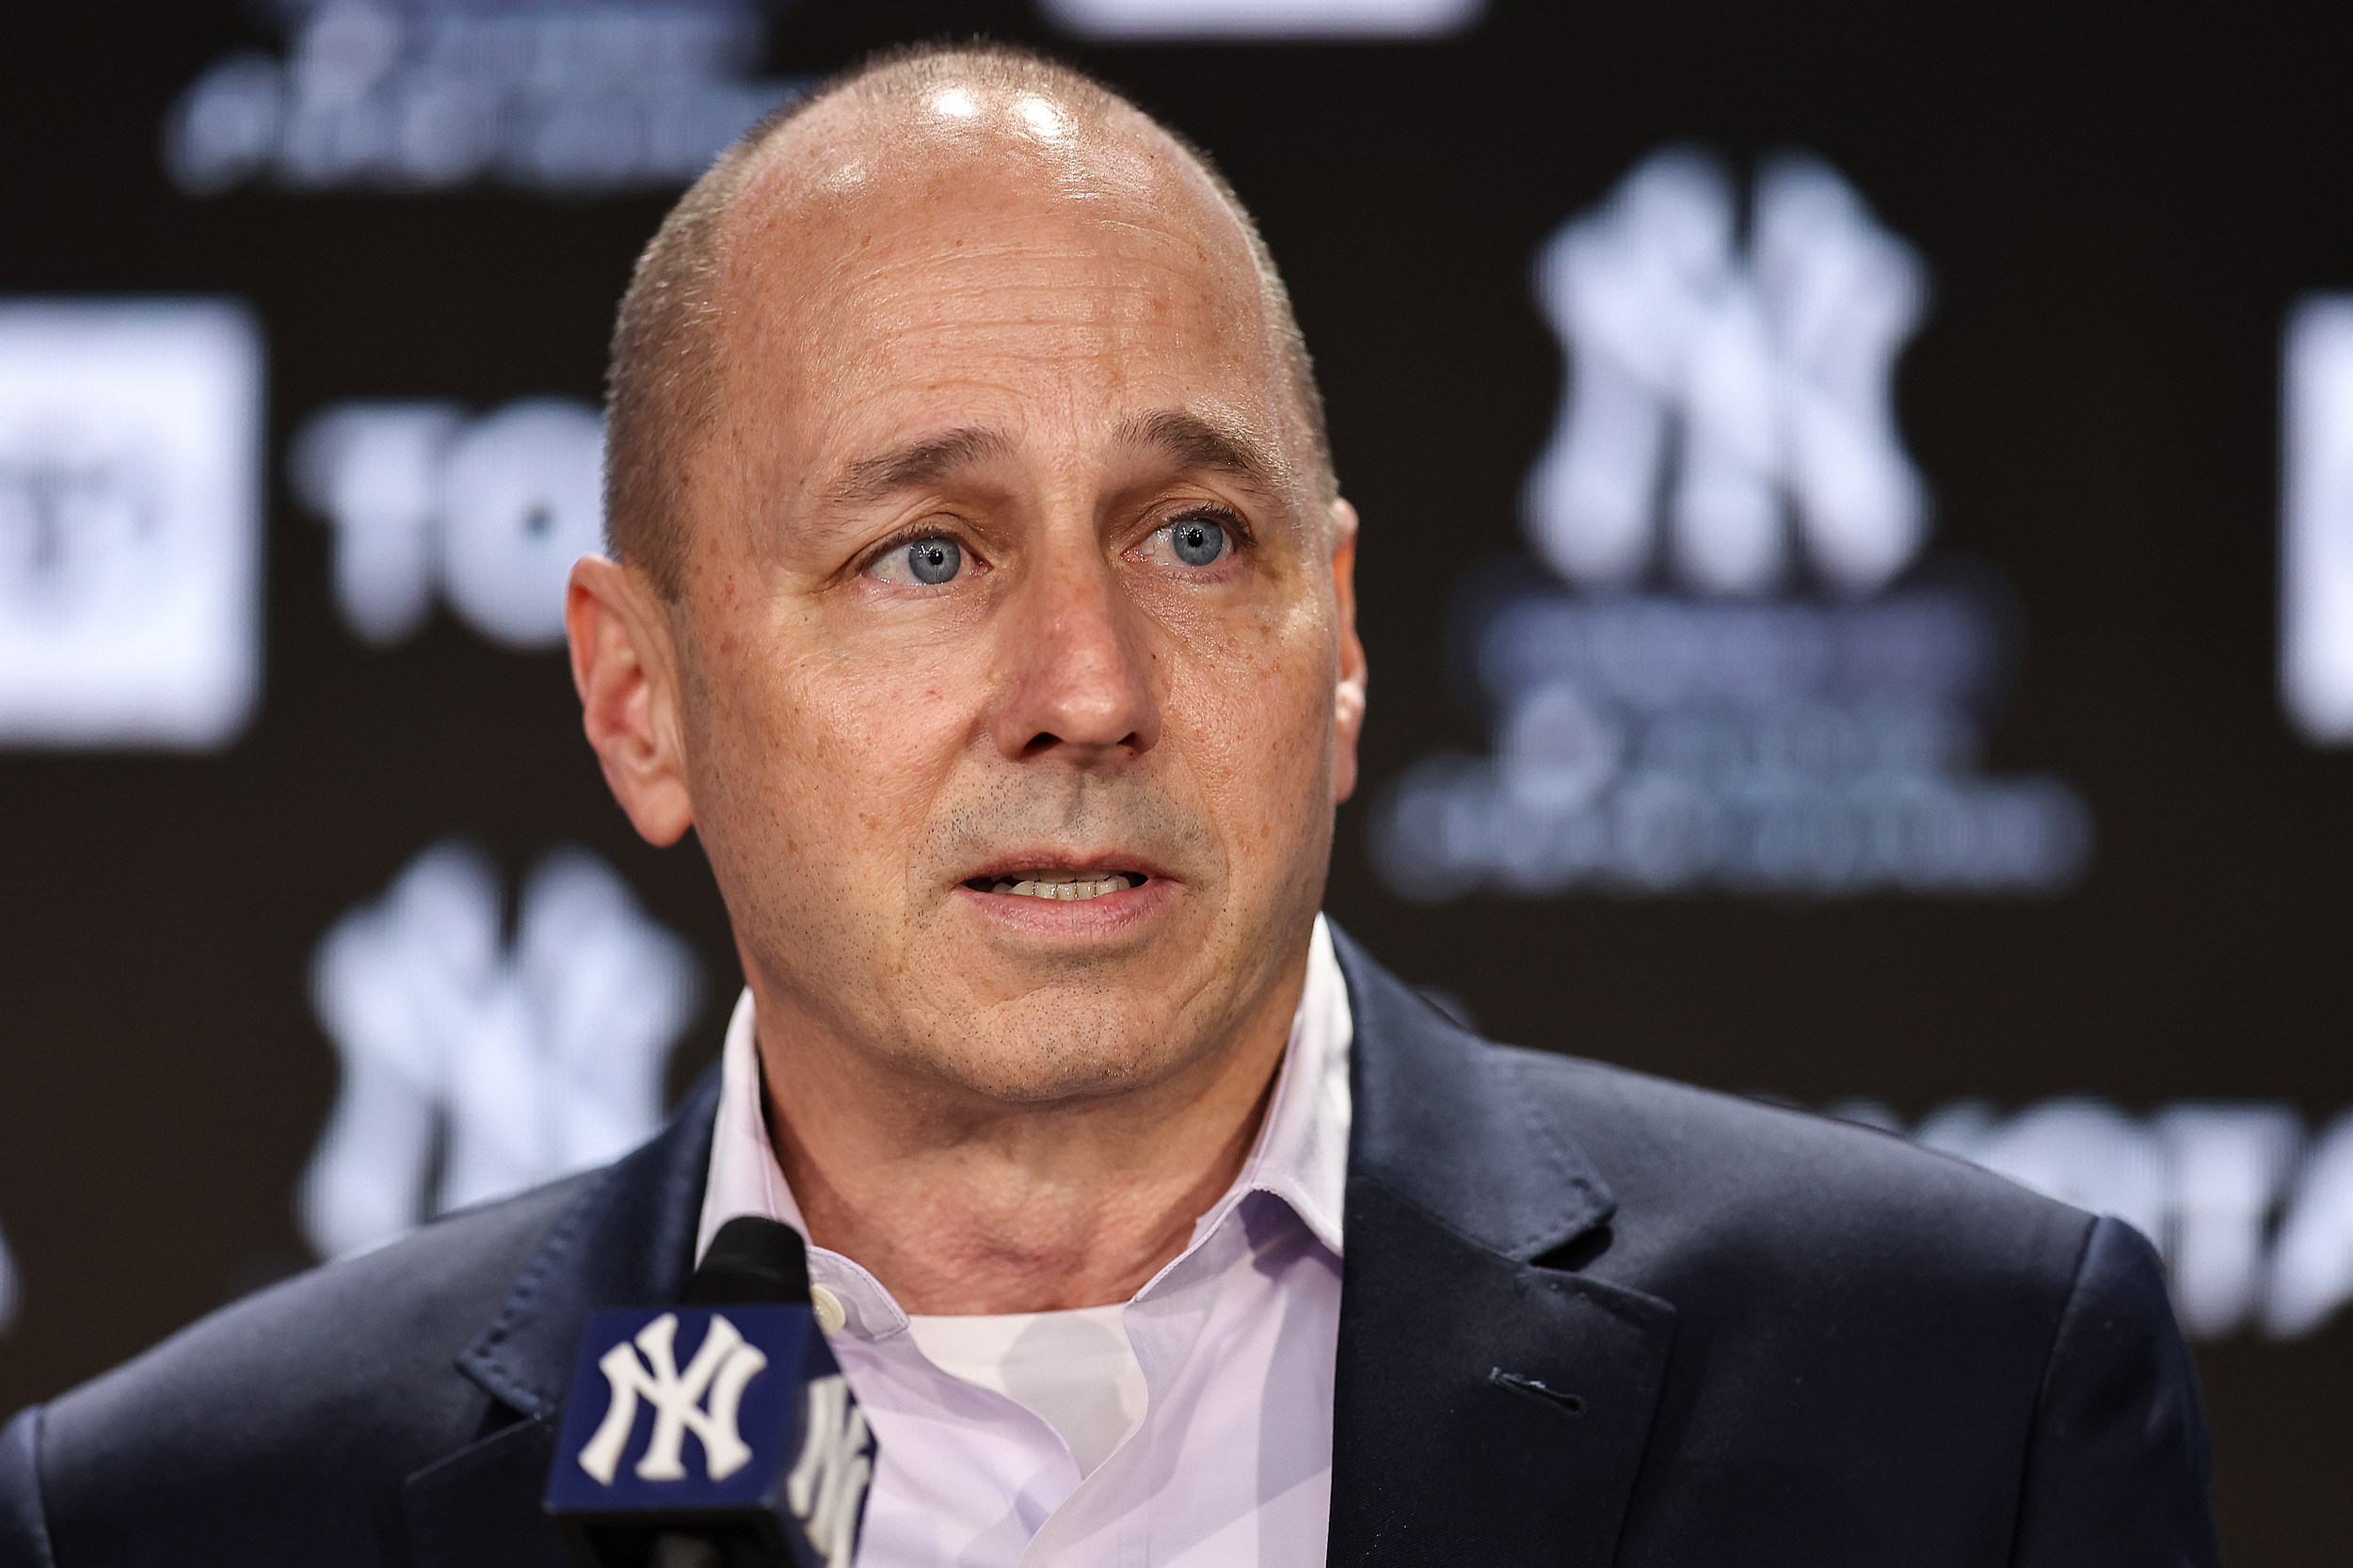 MLB Owes Apology to NY Yankees' Skipper After Embarrassing Gaffe